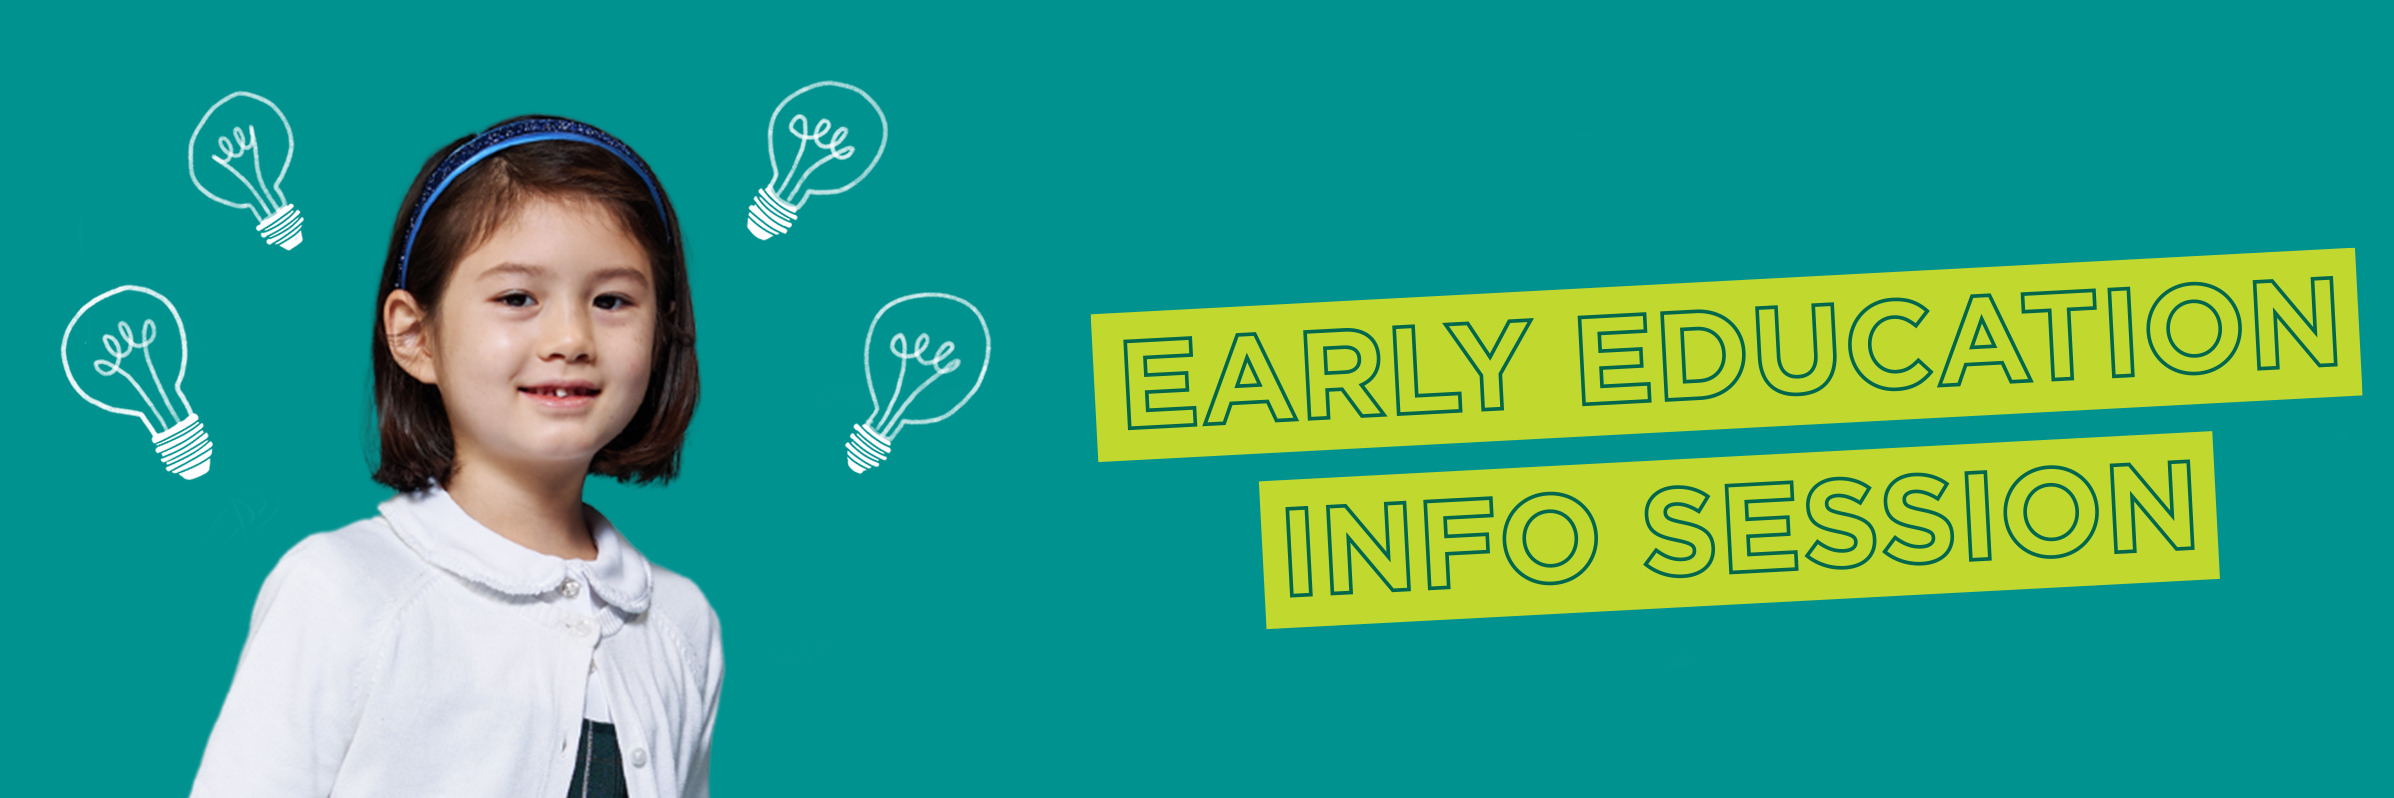 Early Education Info Session